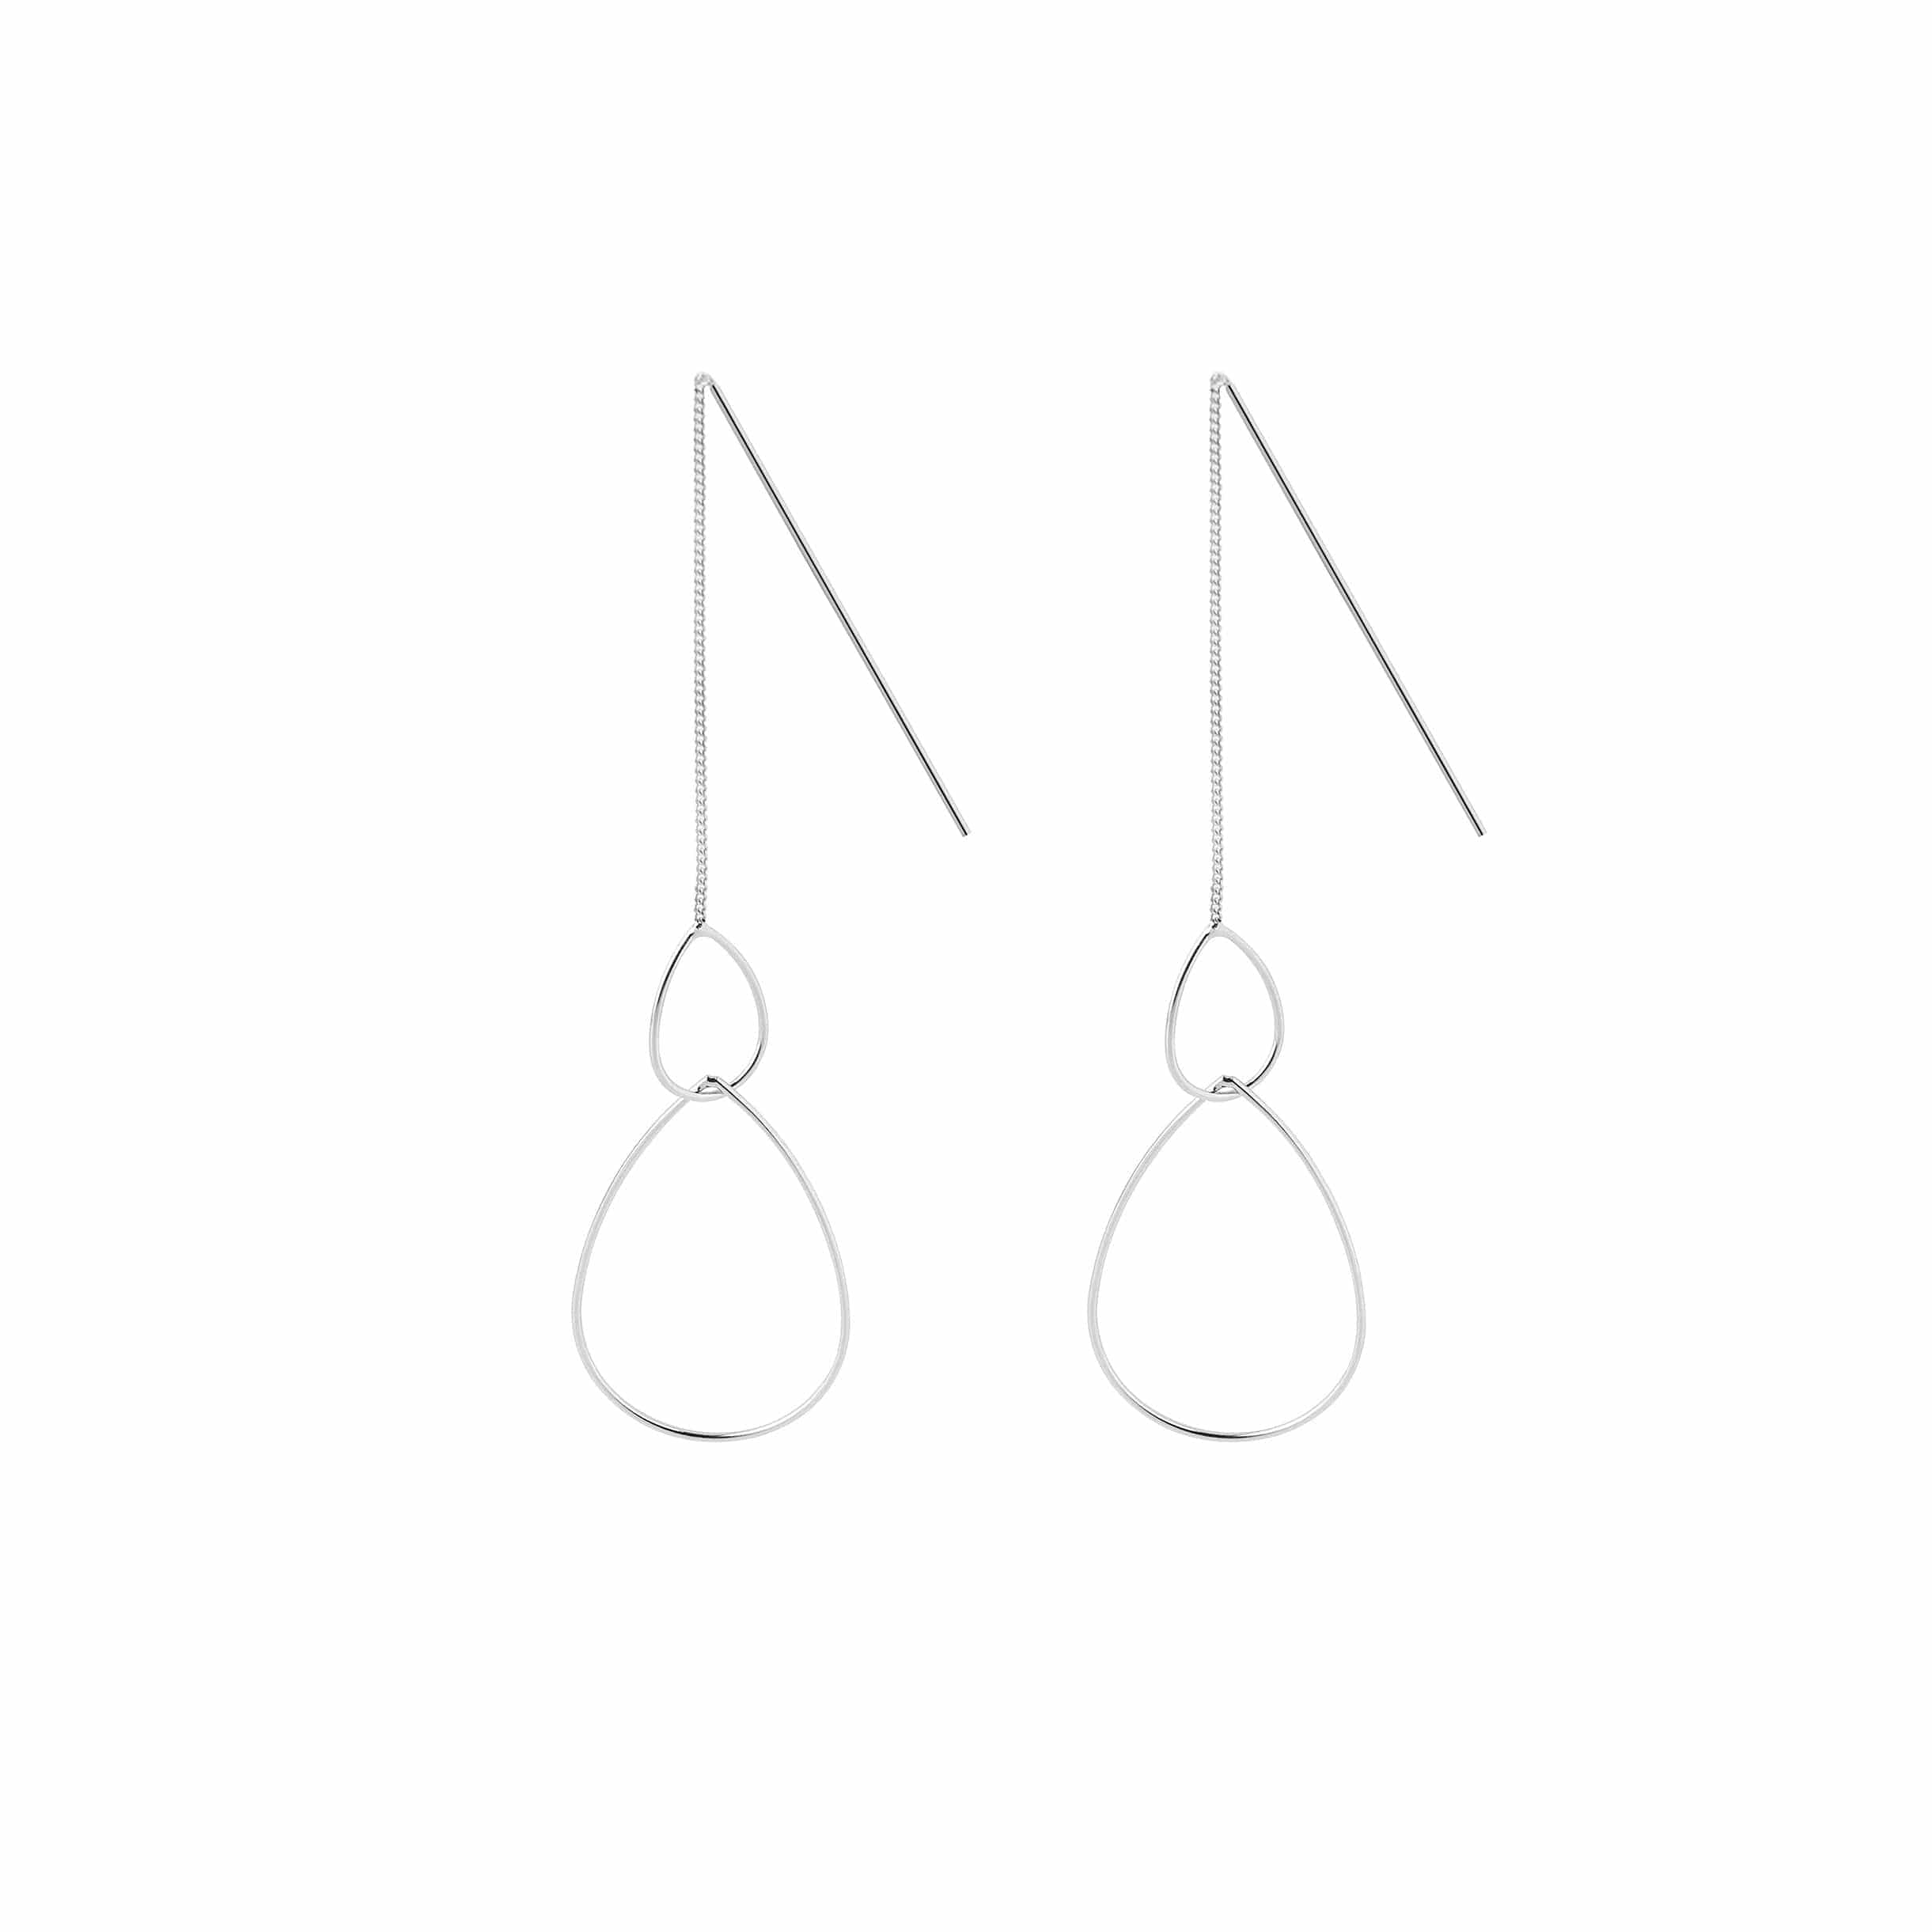 silver hanging earrings with double droplets